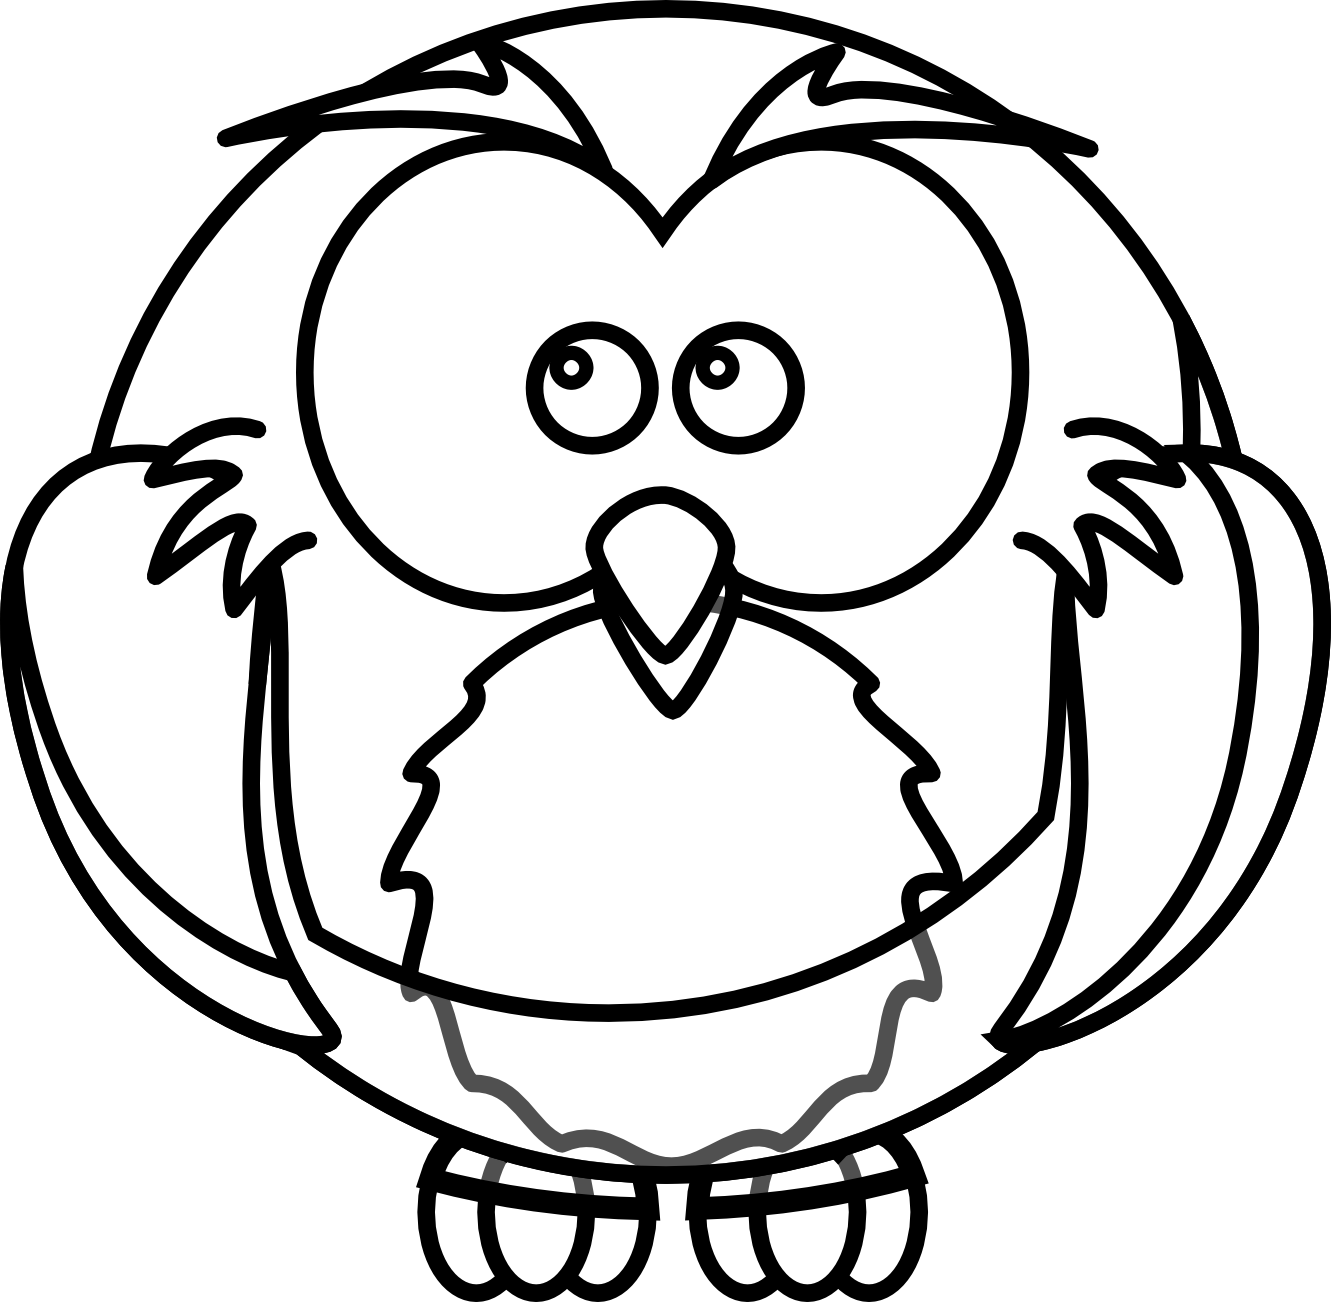 Owl Clip Art Black And White Free Cliparts That You Can Download To    